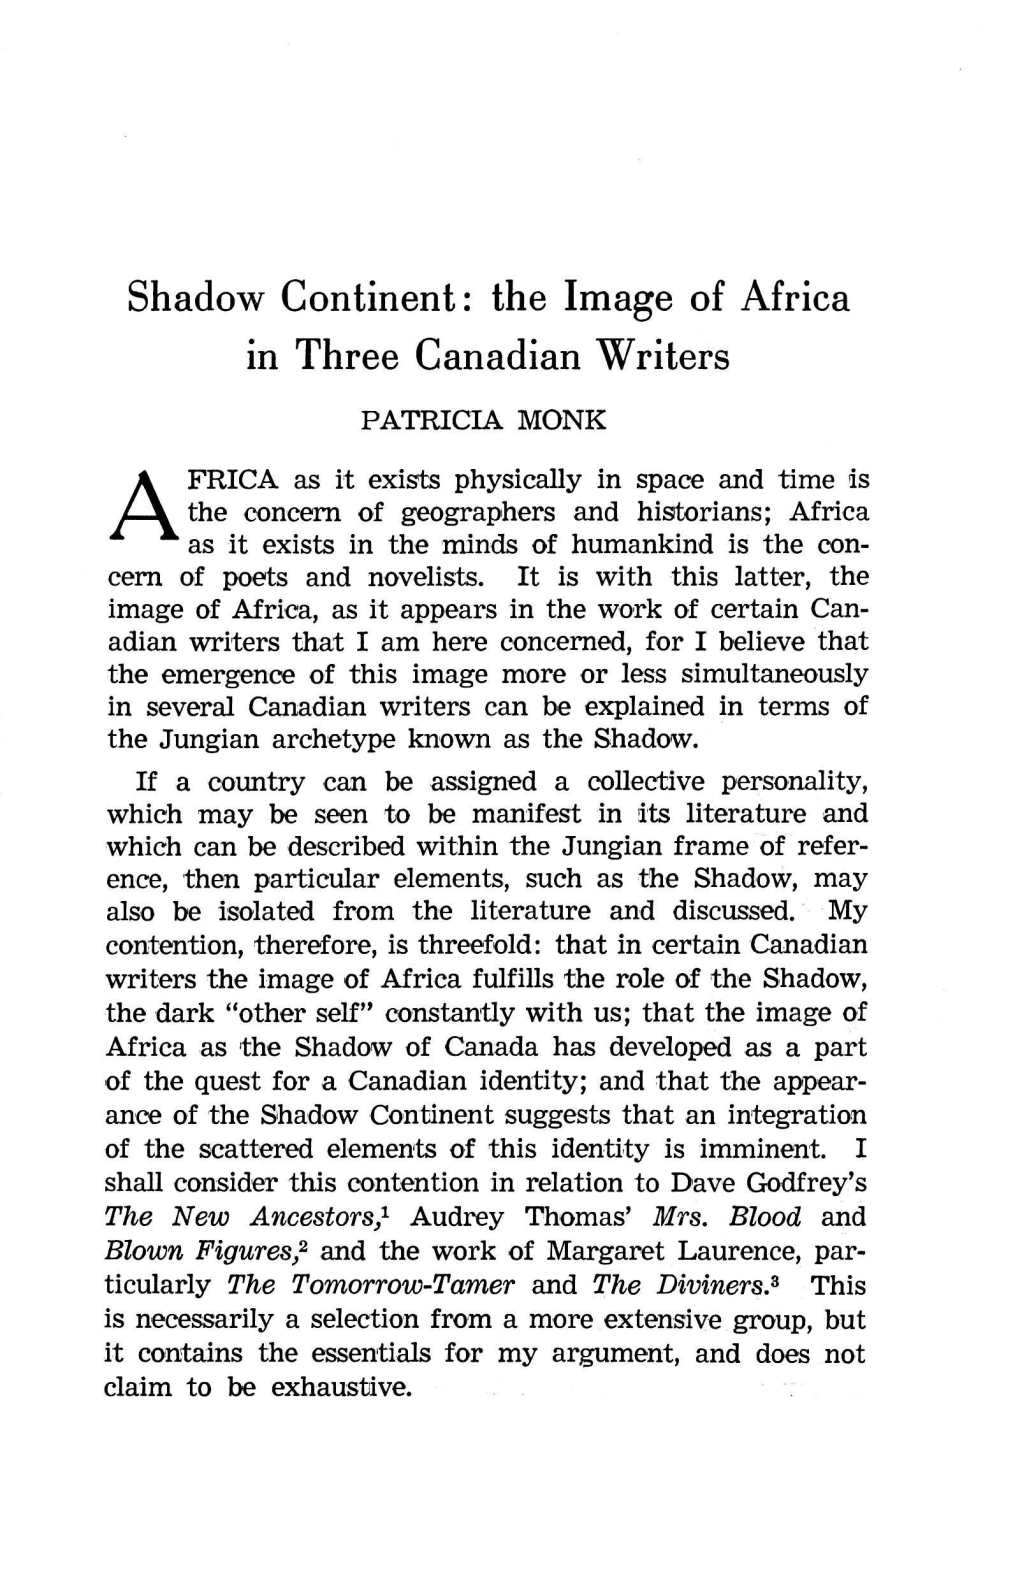 The Image of Africa in Three Canadian Writers